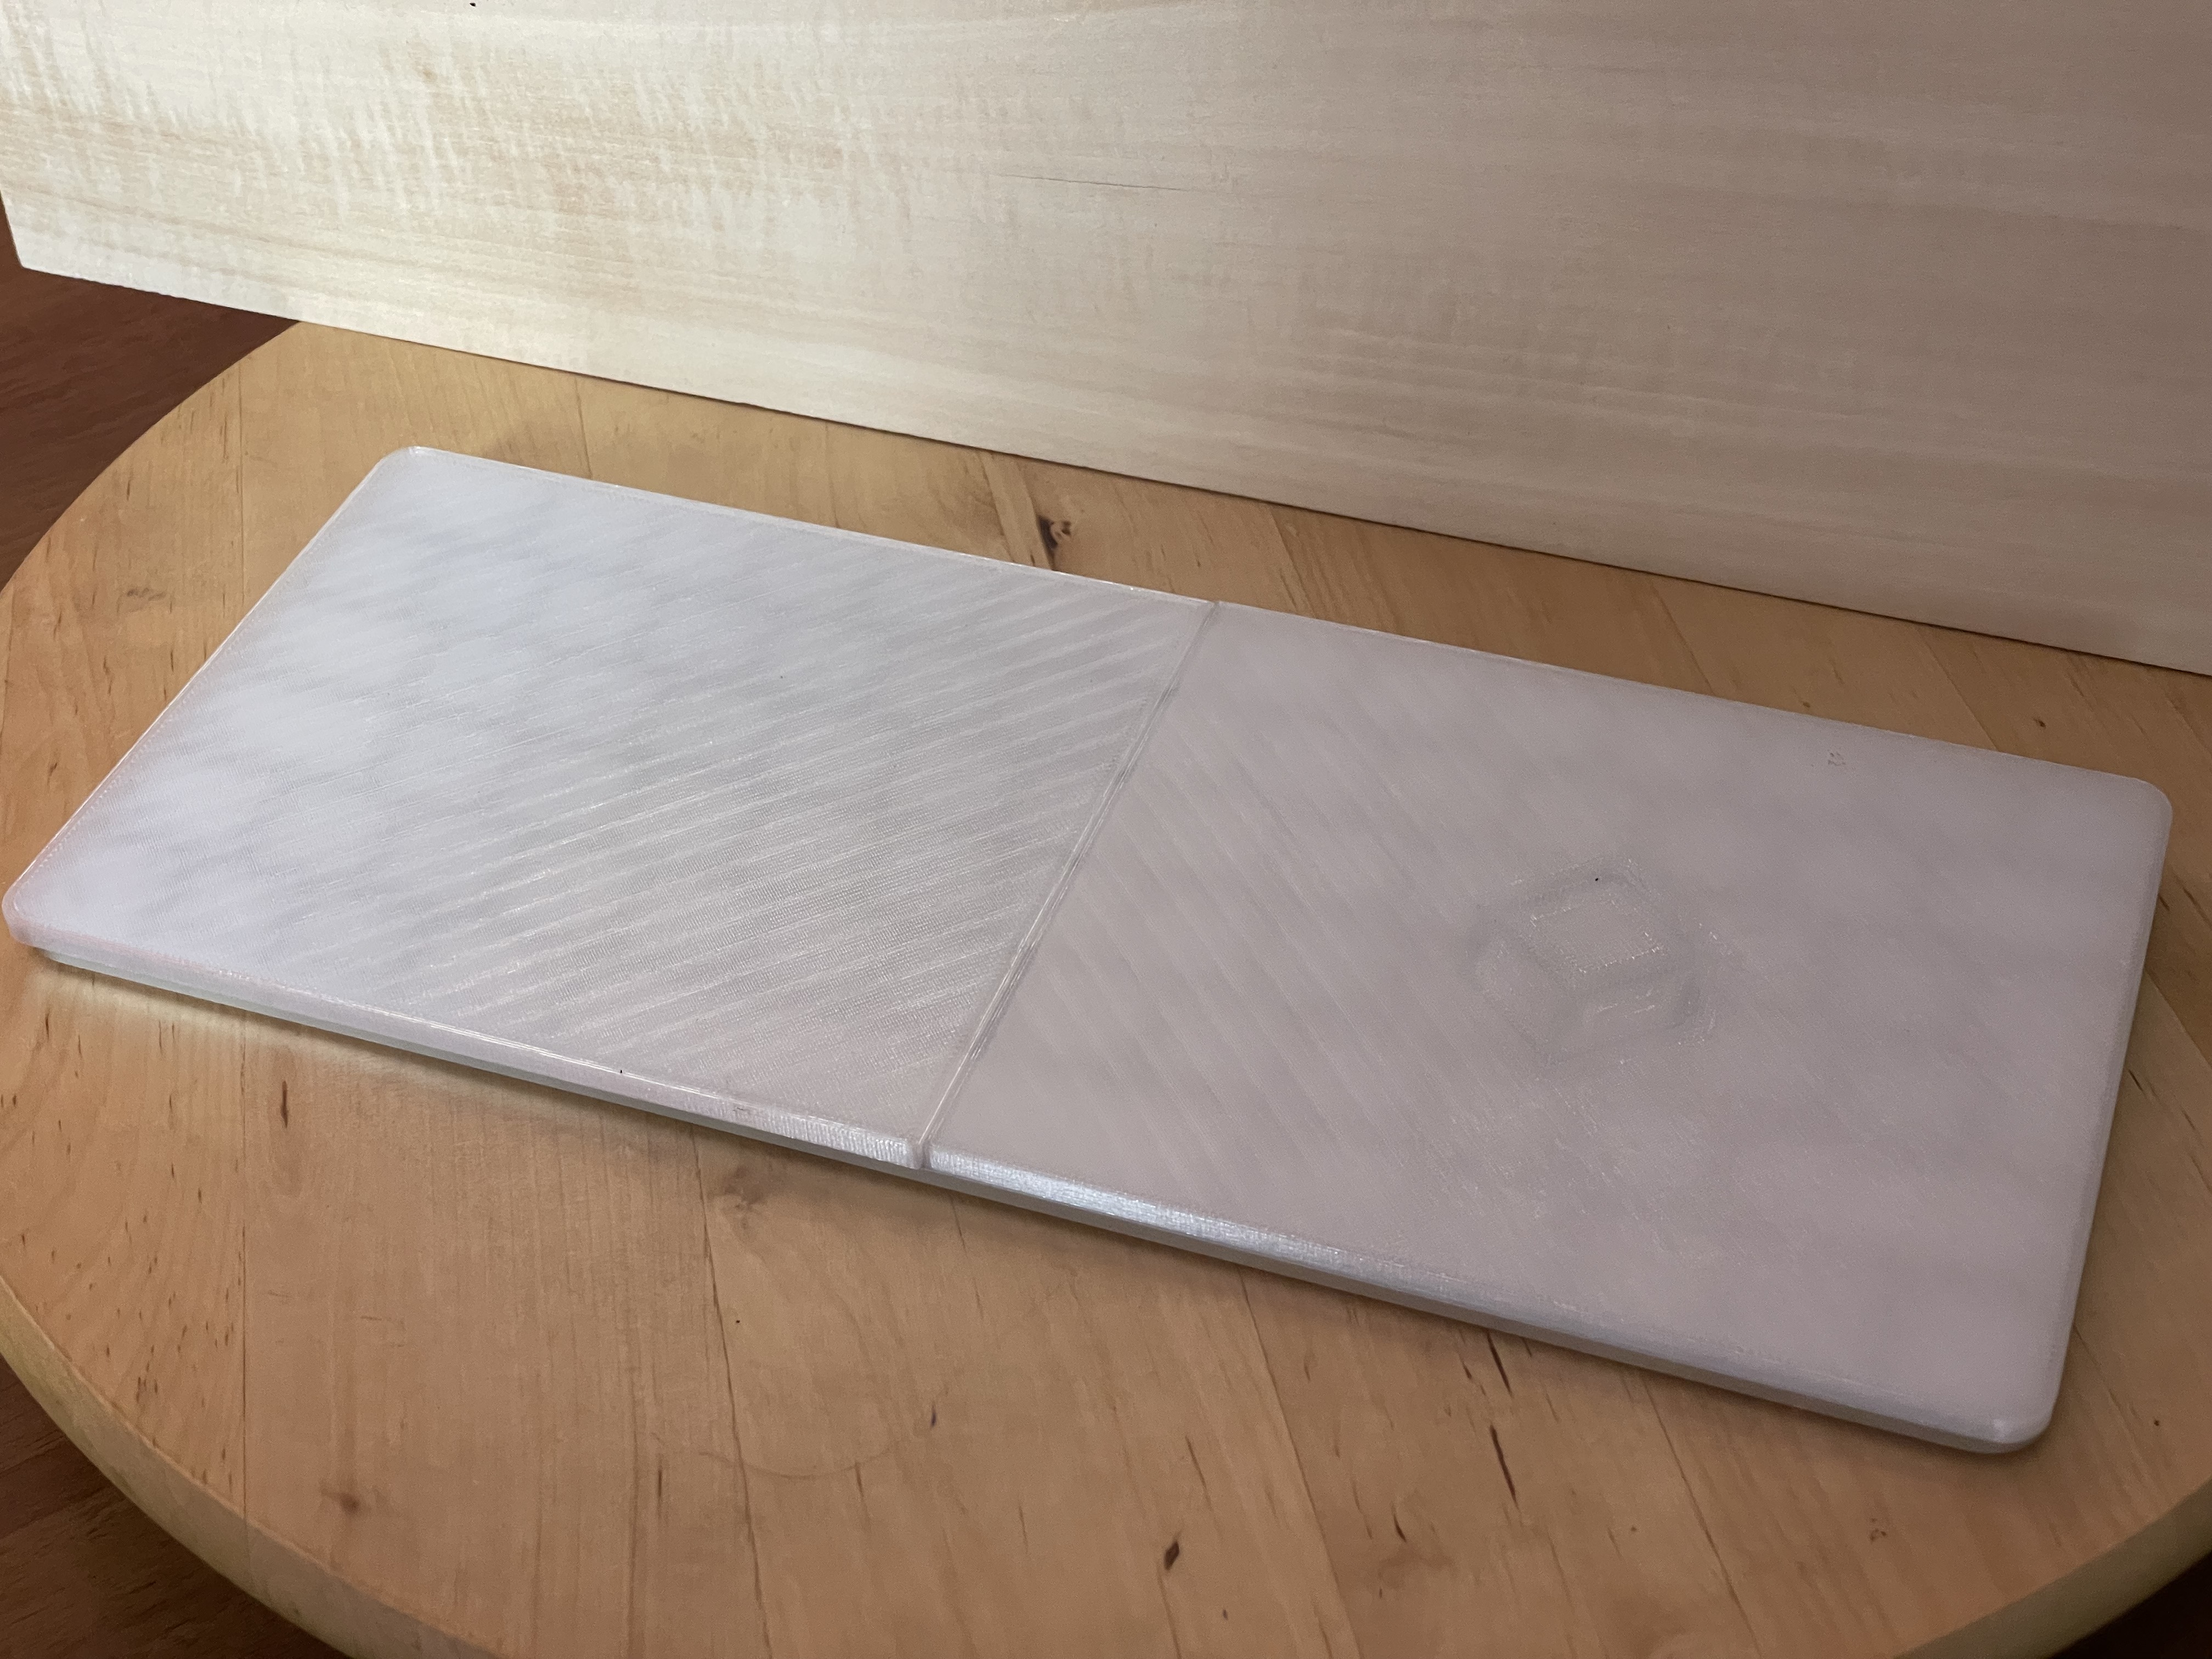 Dust Cover for Apple Keyboard